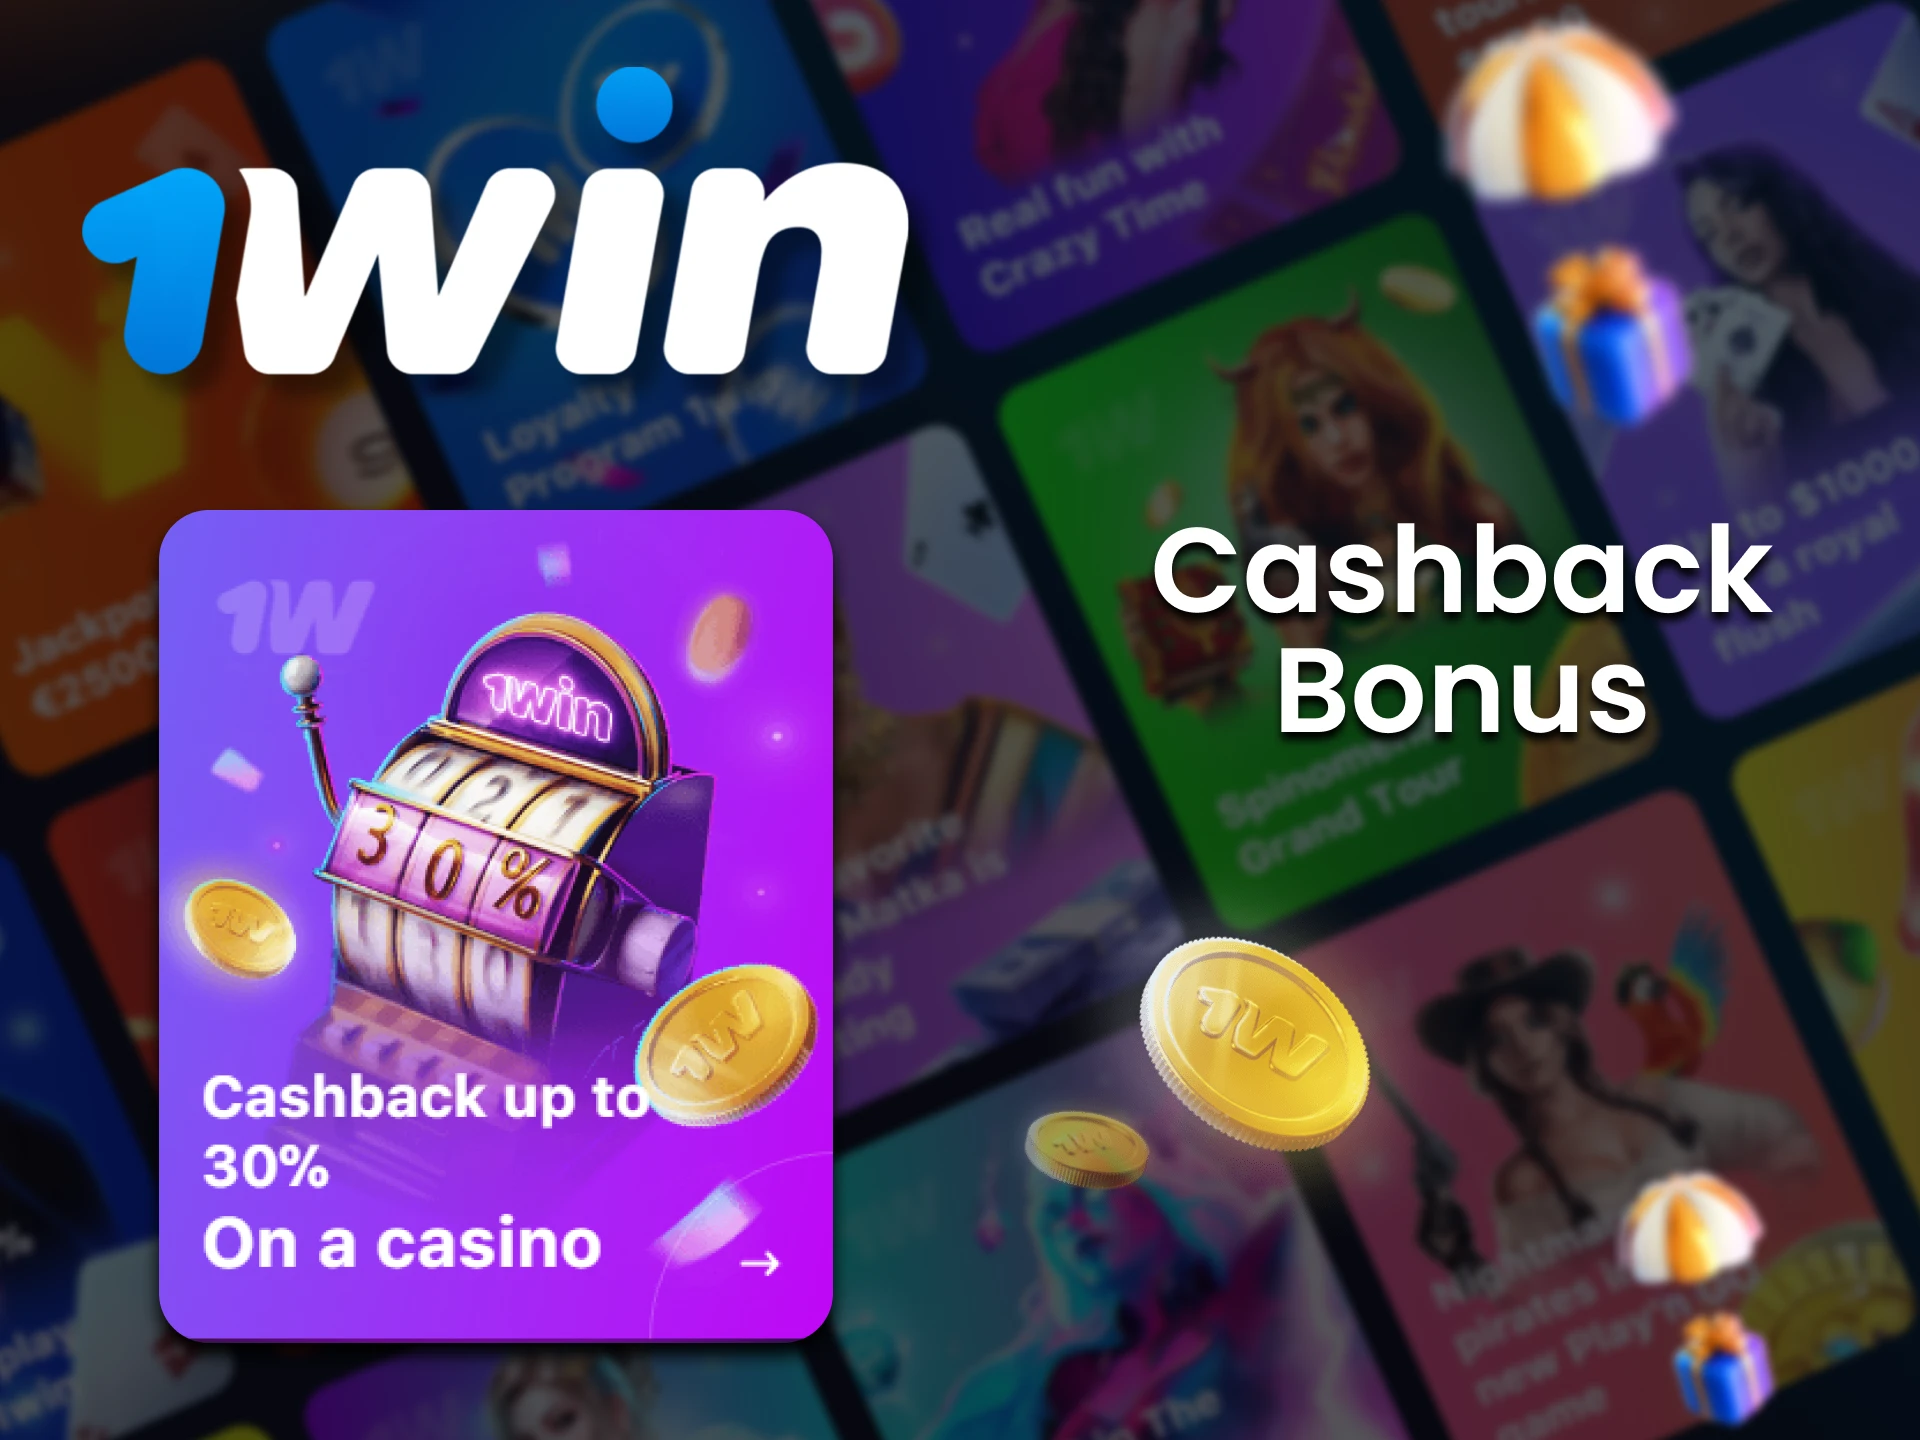 You can get a cashback bonus for Football betting from 1win.